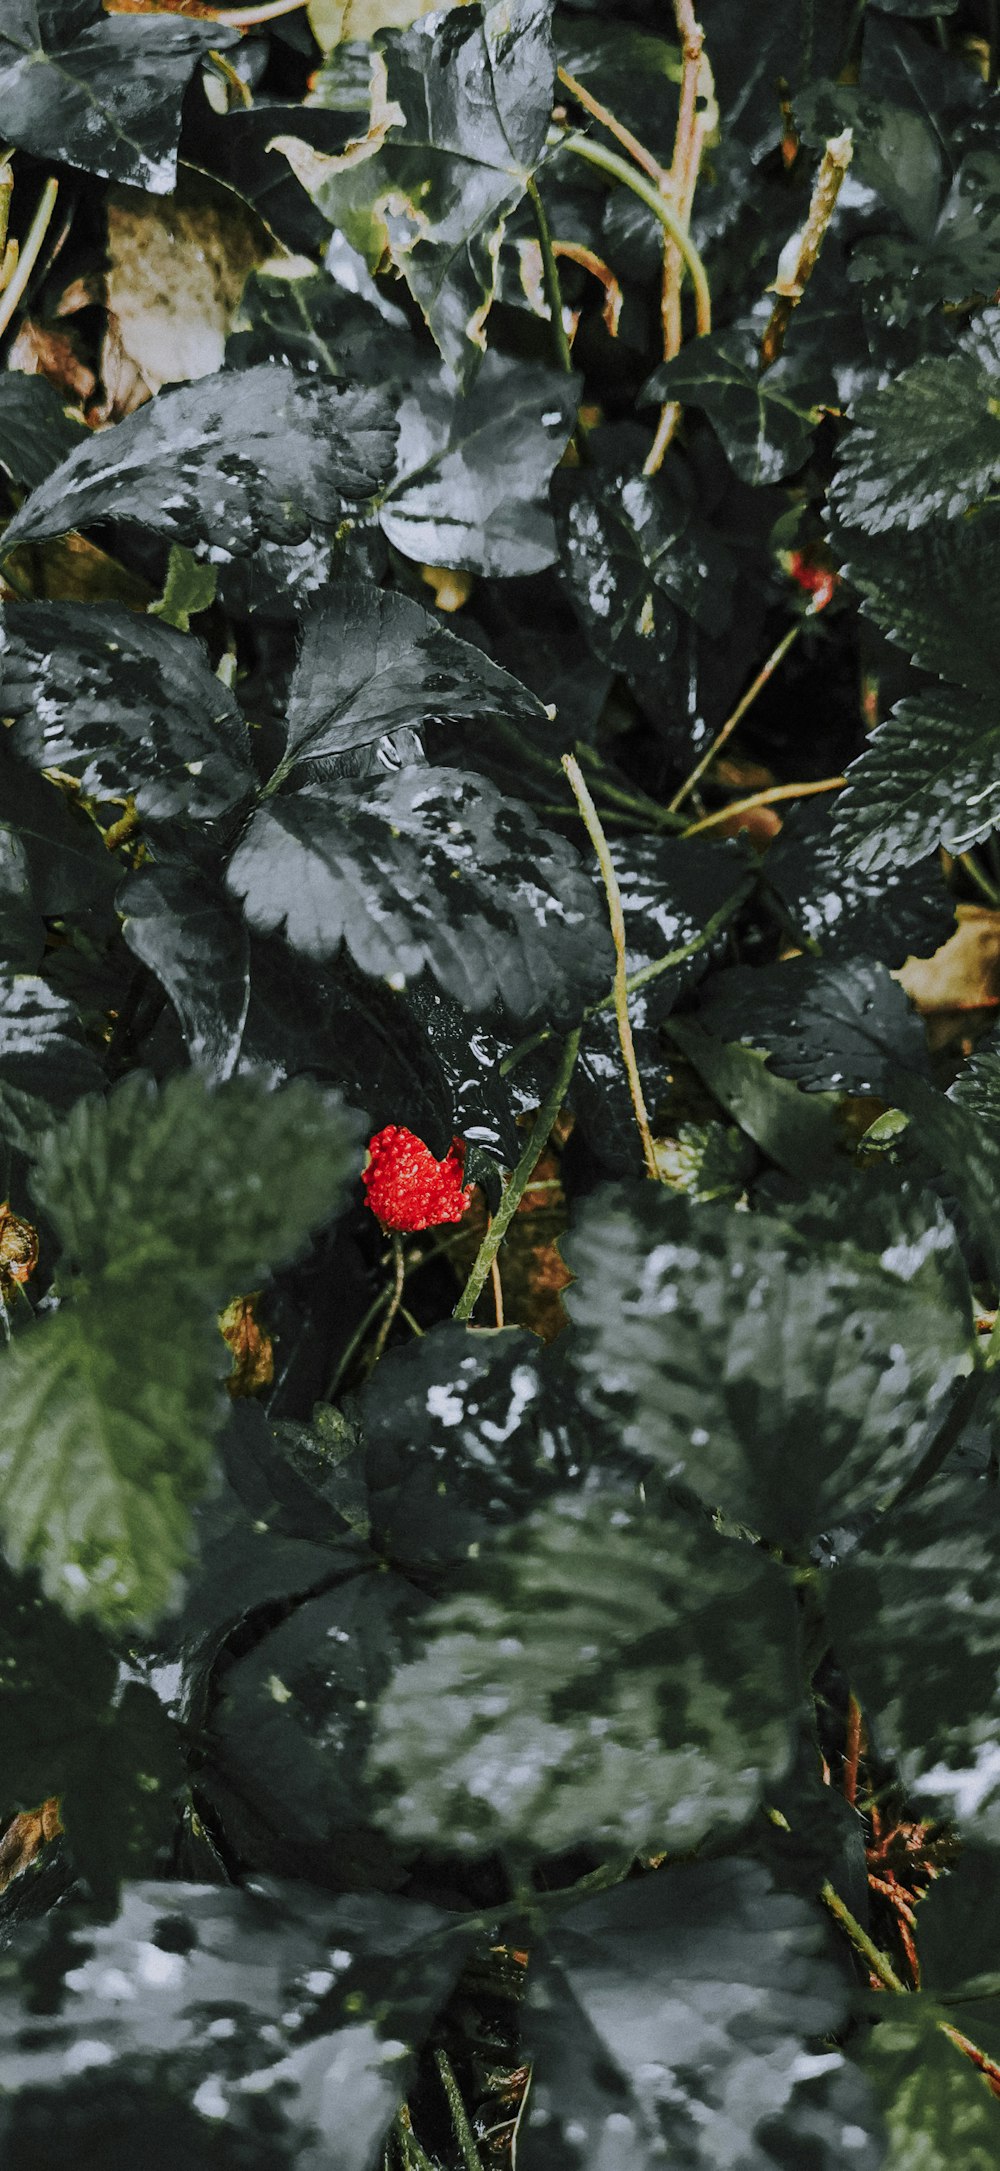 a red flower sitting on top of a lush green plant